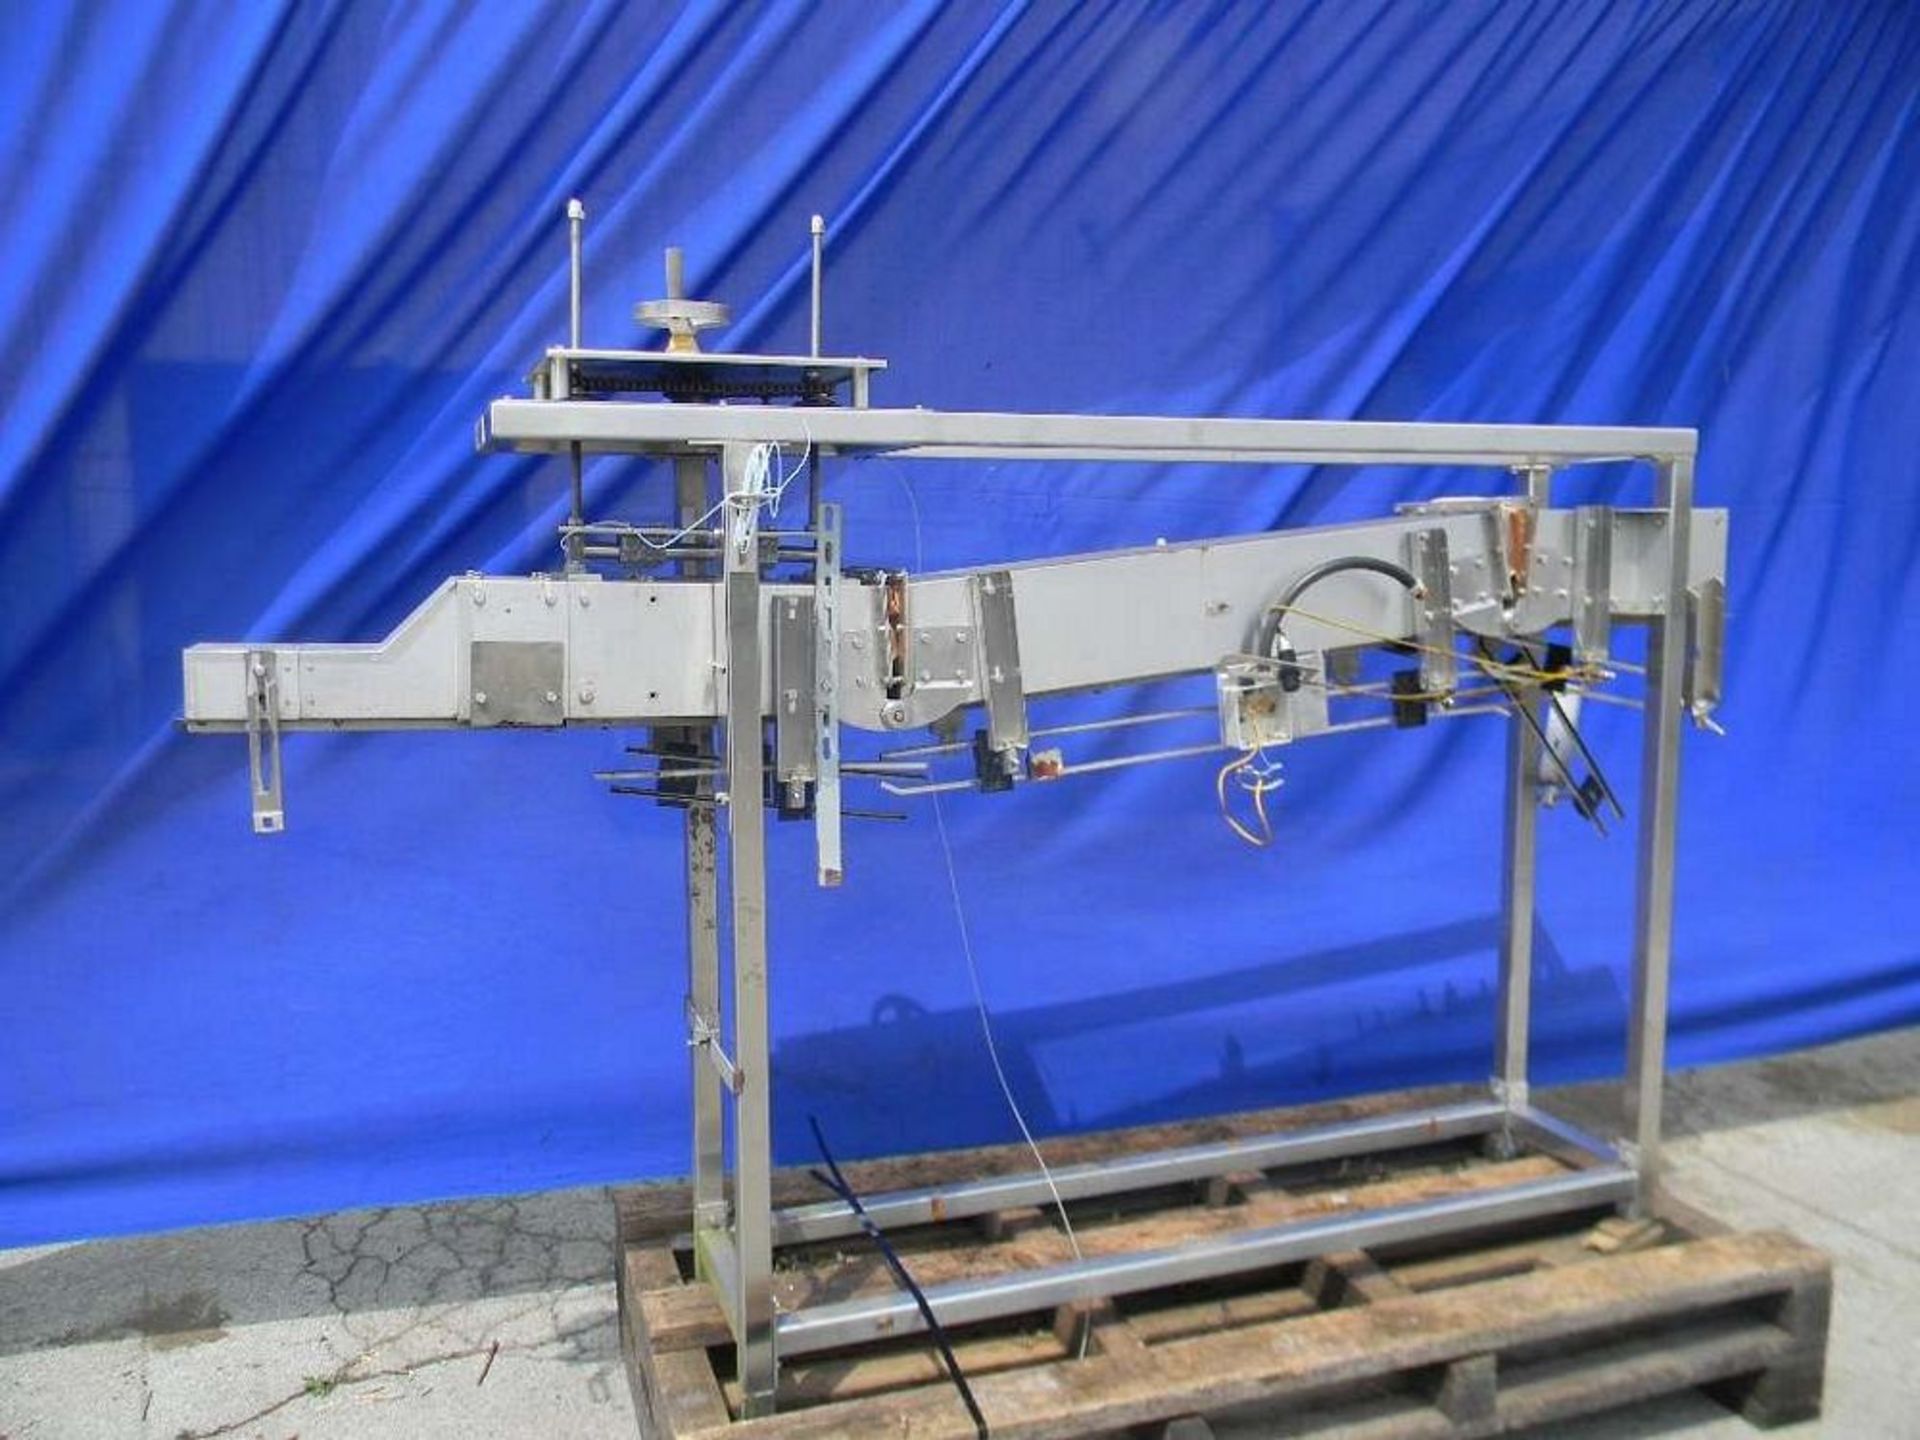 Qty (1) Ling Air Conveyor Pickup Module - All Stainless Steel Construction - Adjustable Infeed - Image 3 of 5